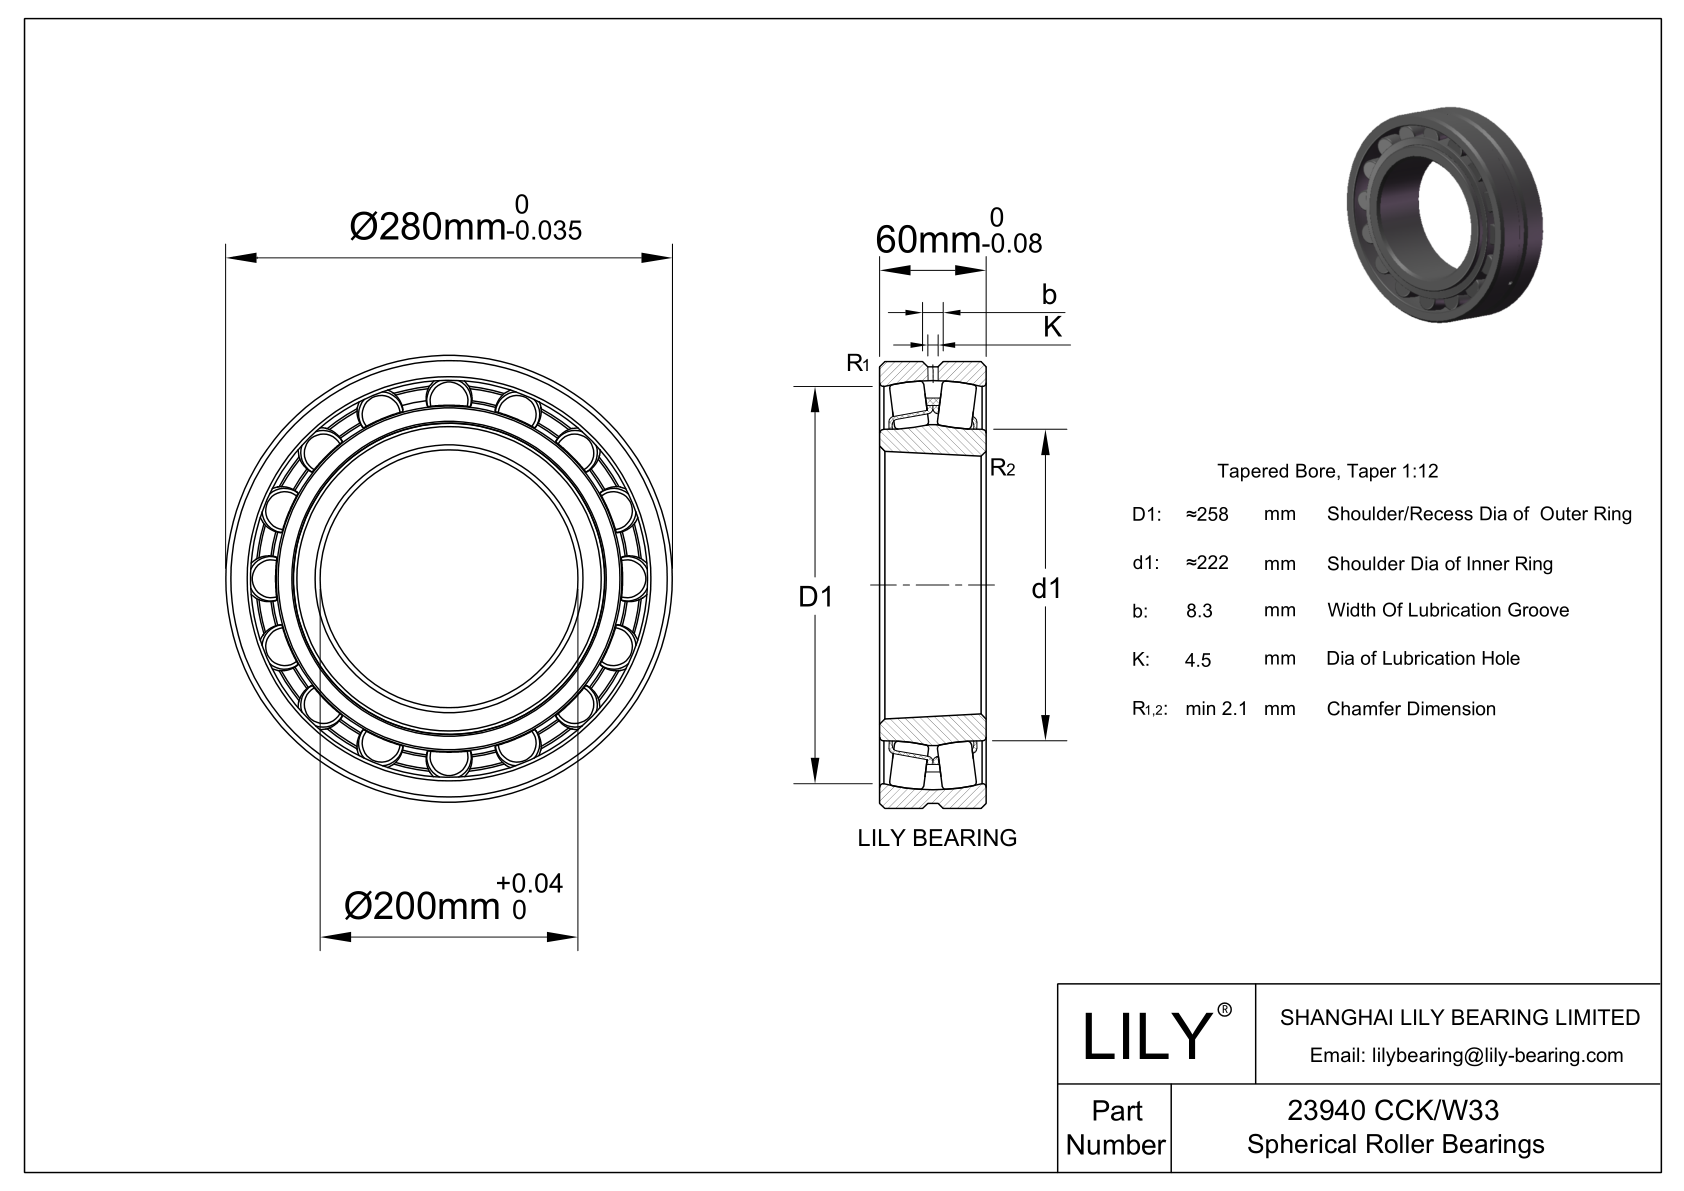 23940 CCK/W33 Double Row Spherical Roller Bearing cad drawing